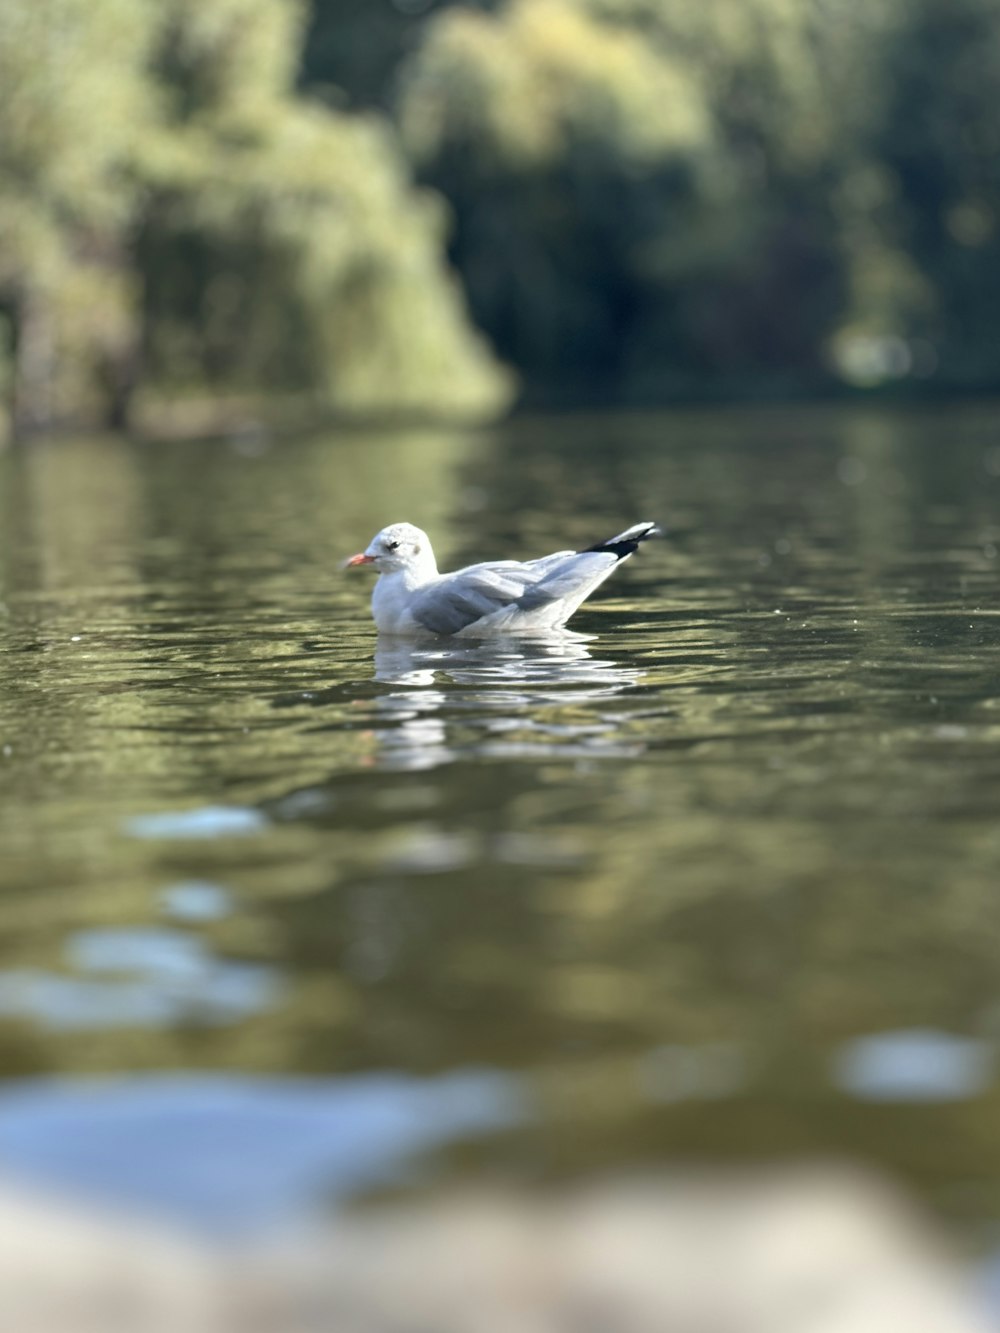 a seagull floating on a lake with trees in the background